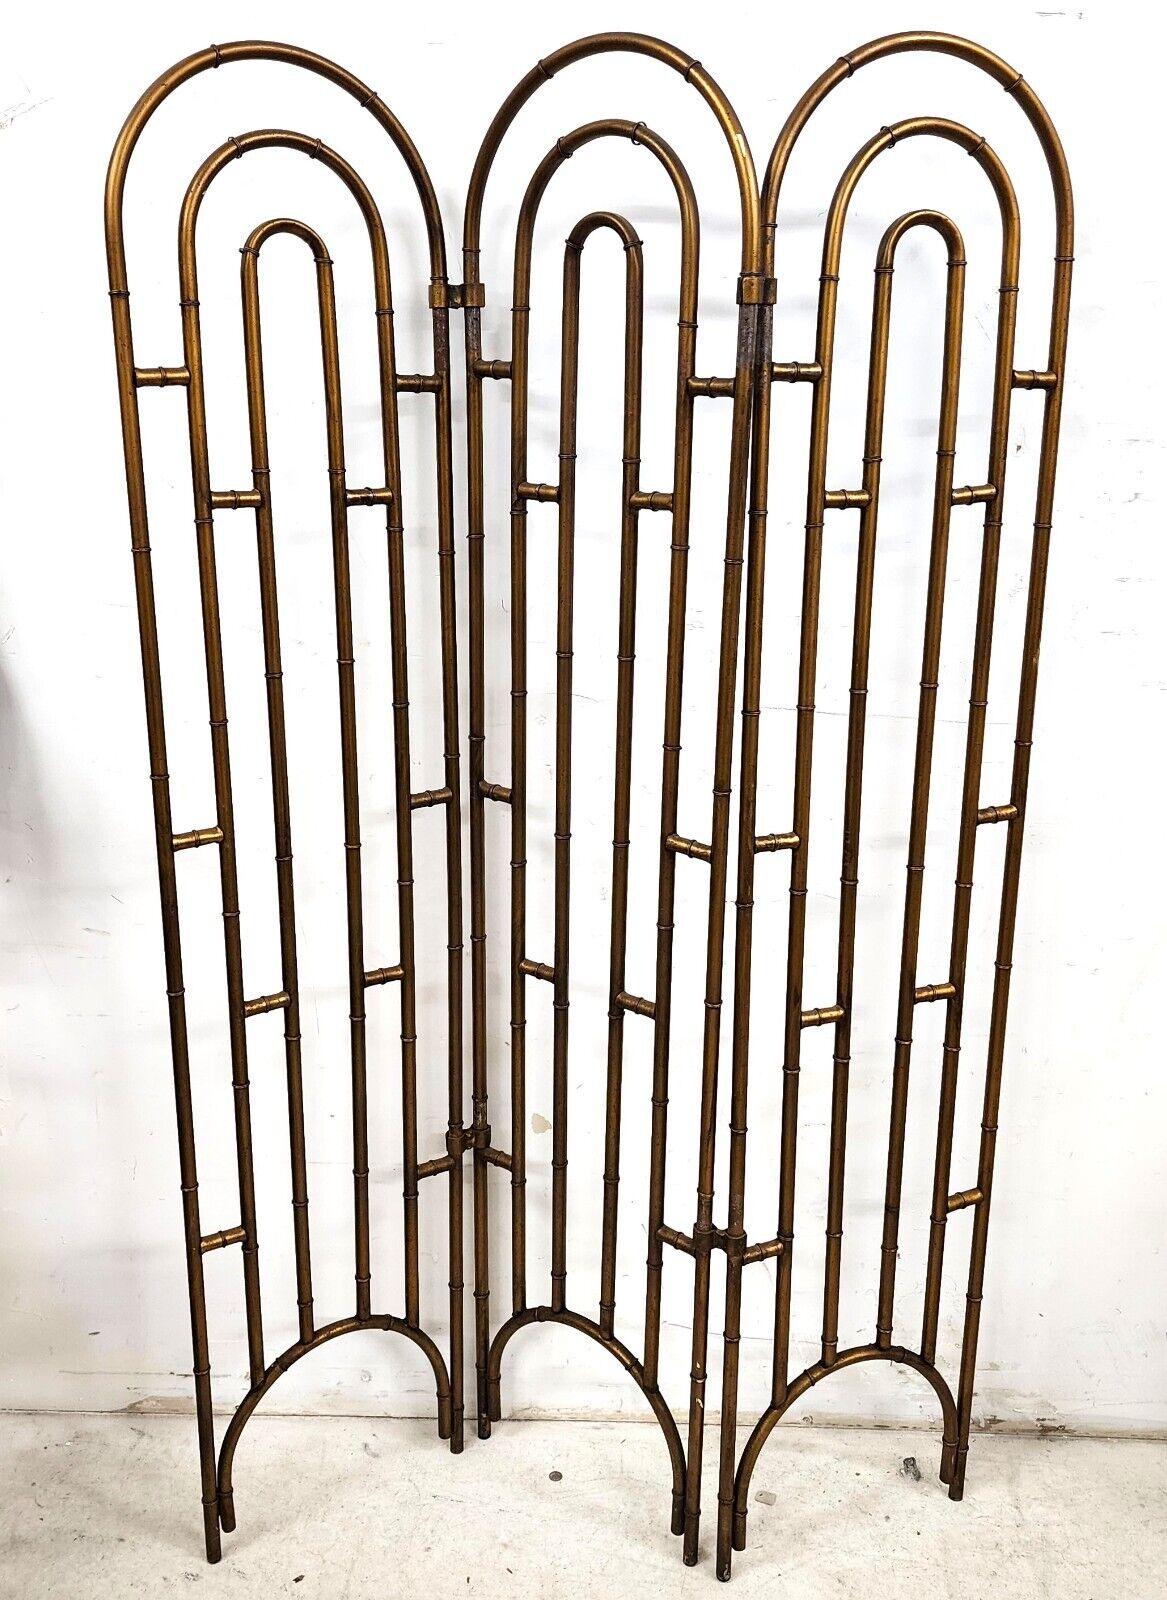 For FULL item description click on CONTINUE READING at the bottom of this page.

Offering One Of Our Recent Palm Beach Estate Fine Furniture Acquisitions Of A
Vintage 3 Panel Steel Room Divider Screen Paravent Regency Steampunk 

Very heavy and